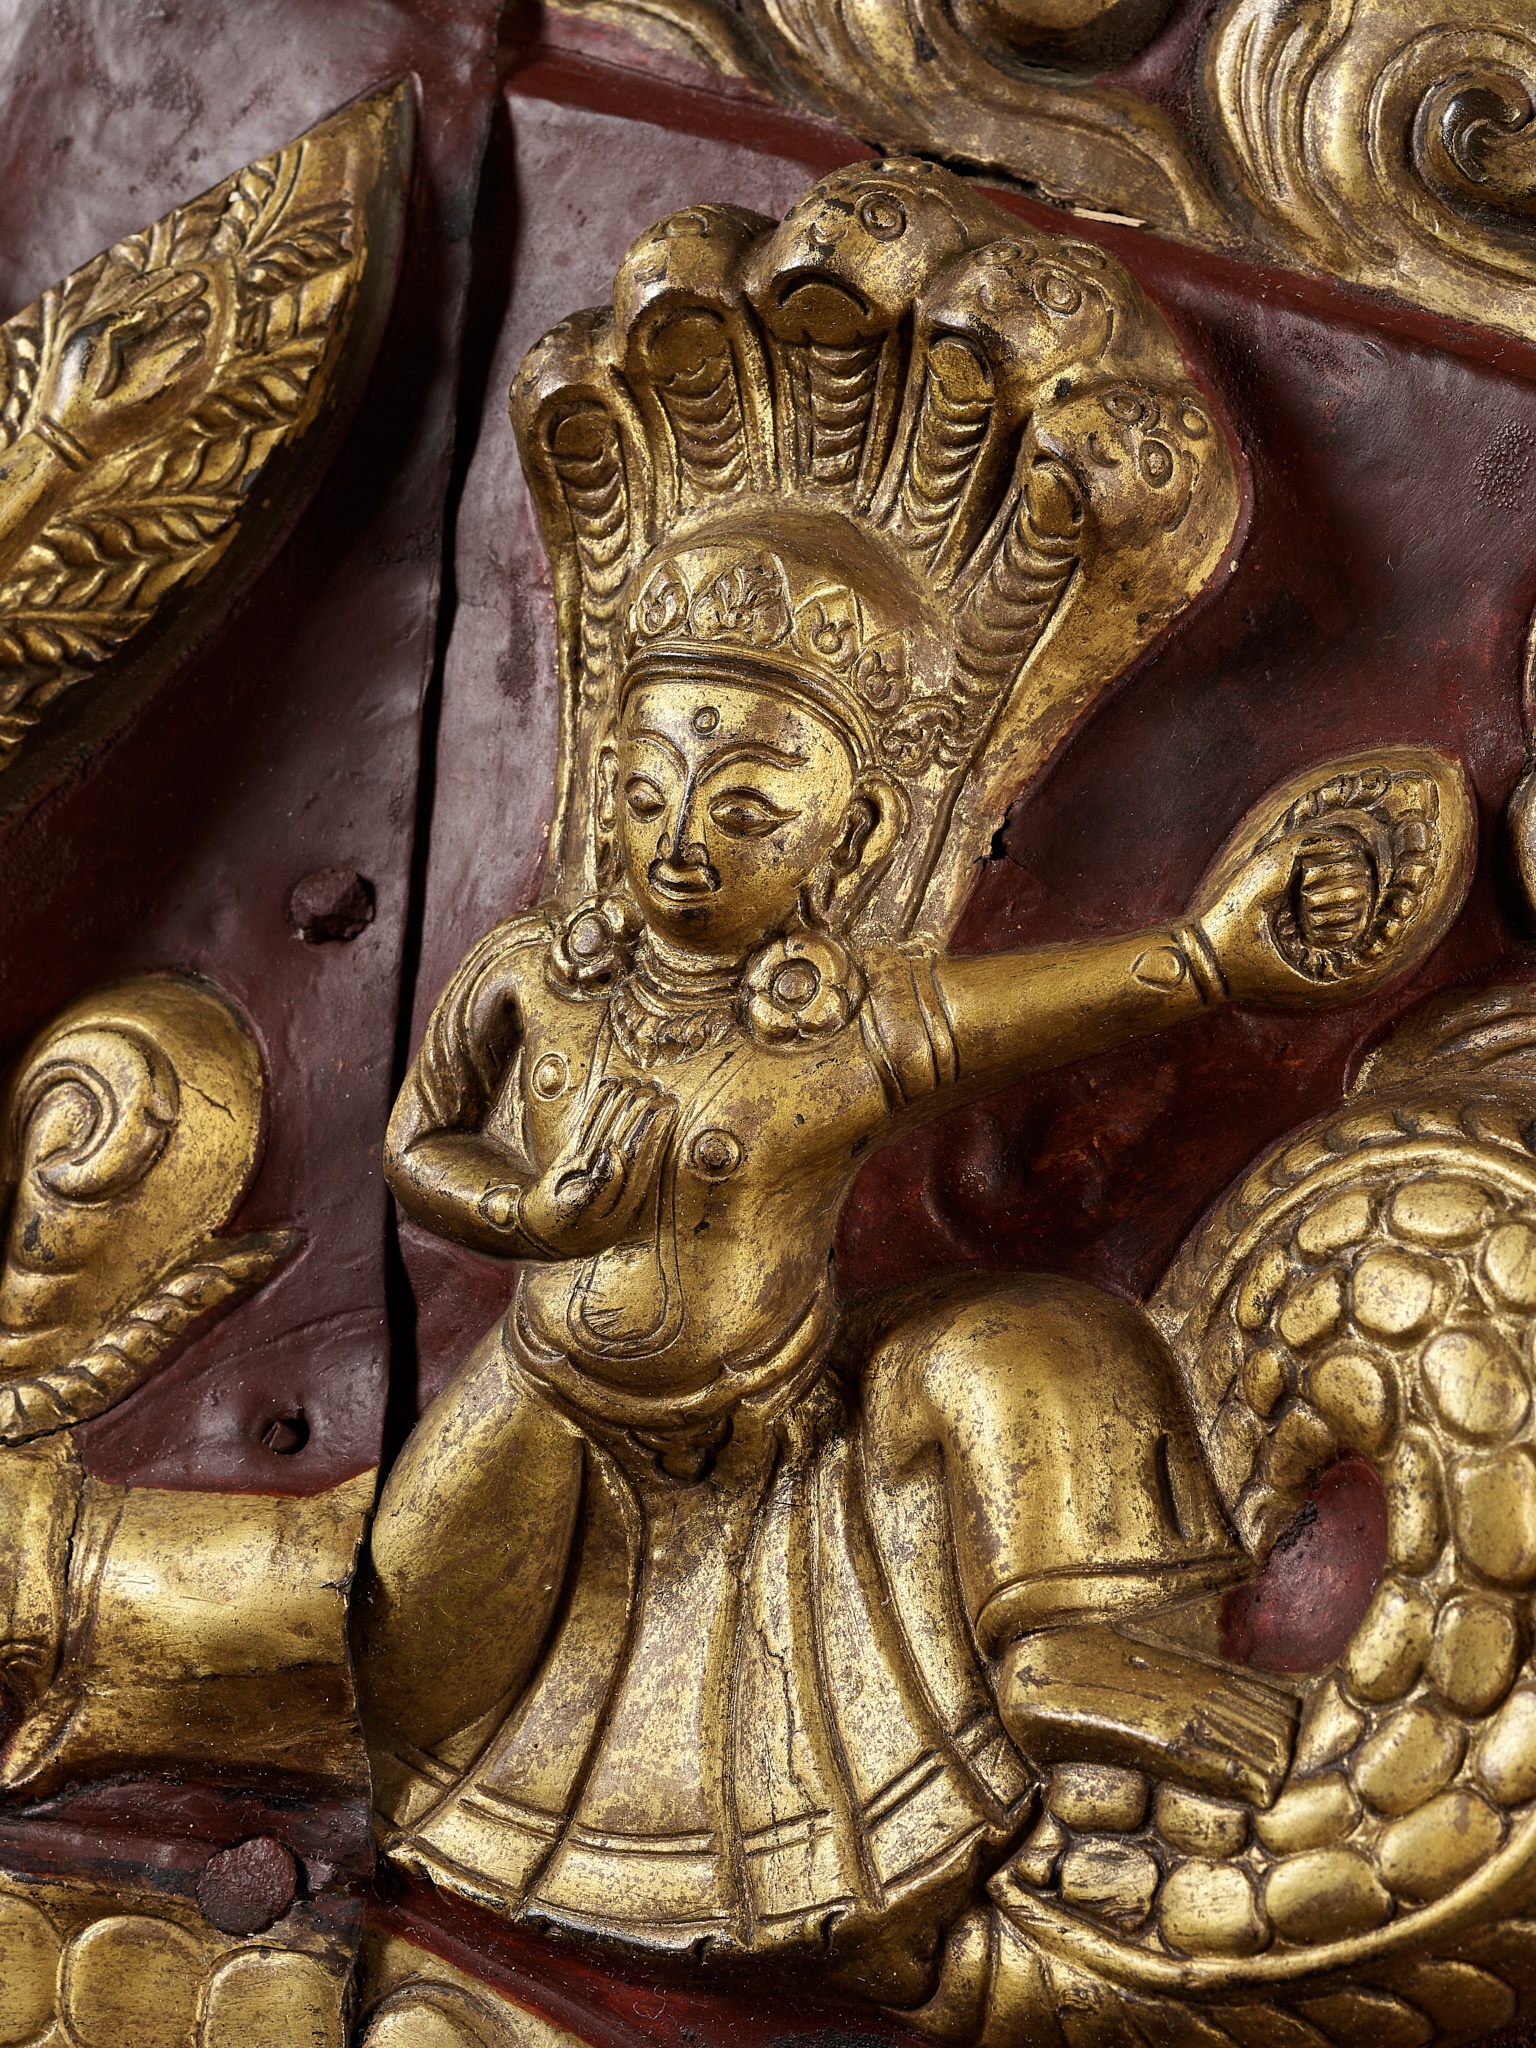 A LARGE GILT AND LACQUERED COPPER REPOUSSE TORANA, NEPAL, 17TH-18TH CENTURY - Image 3 of 9